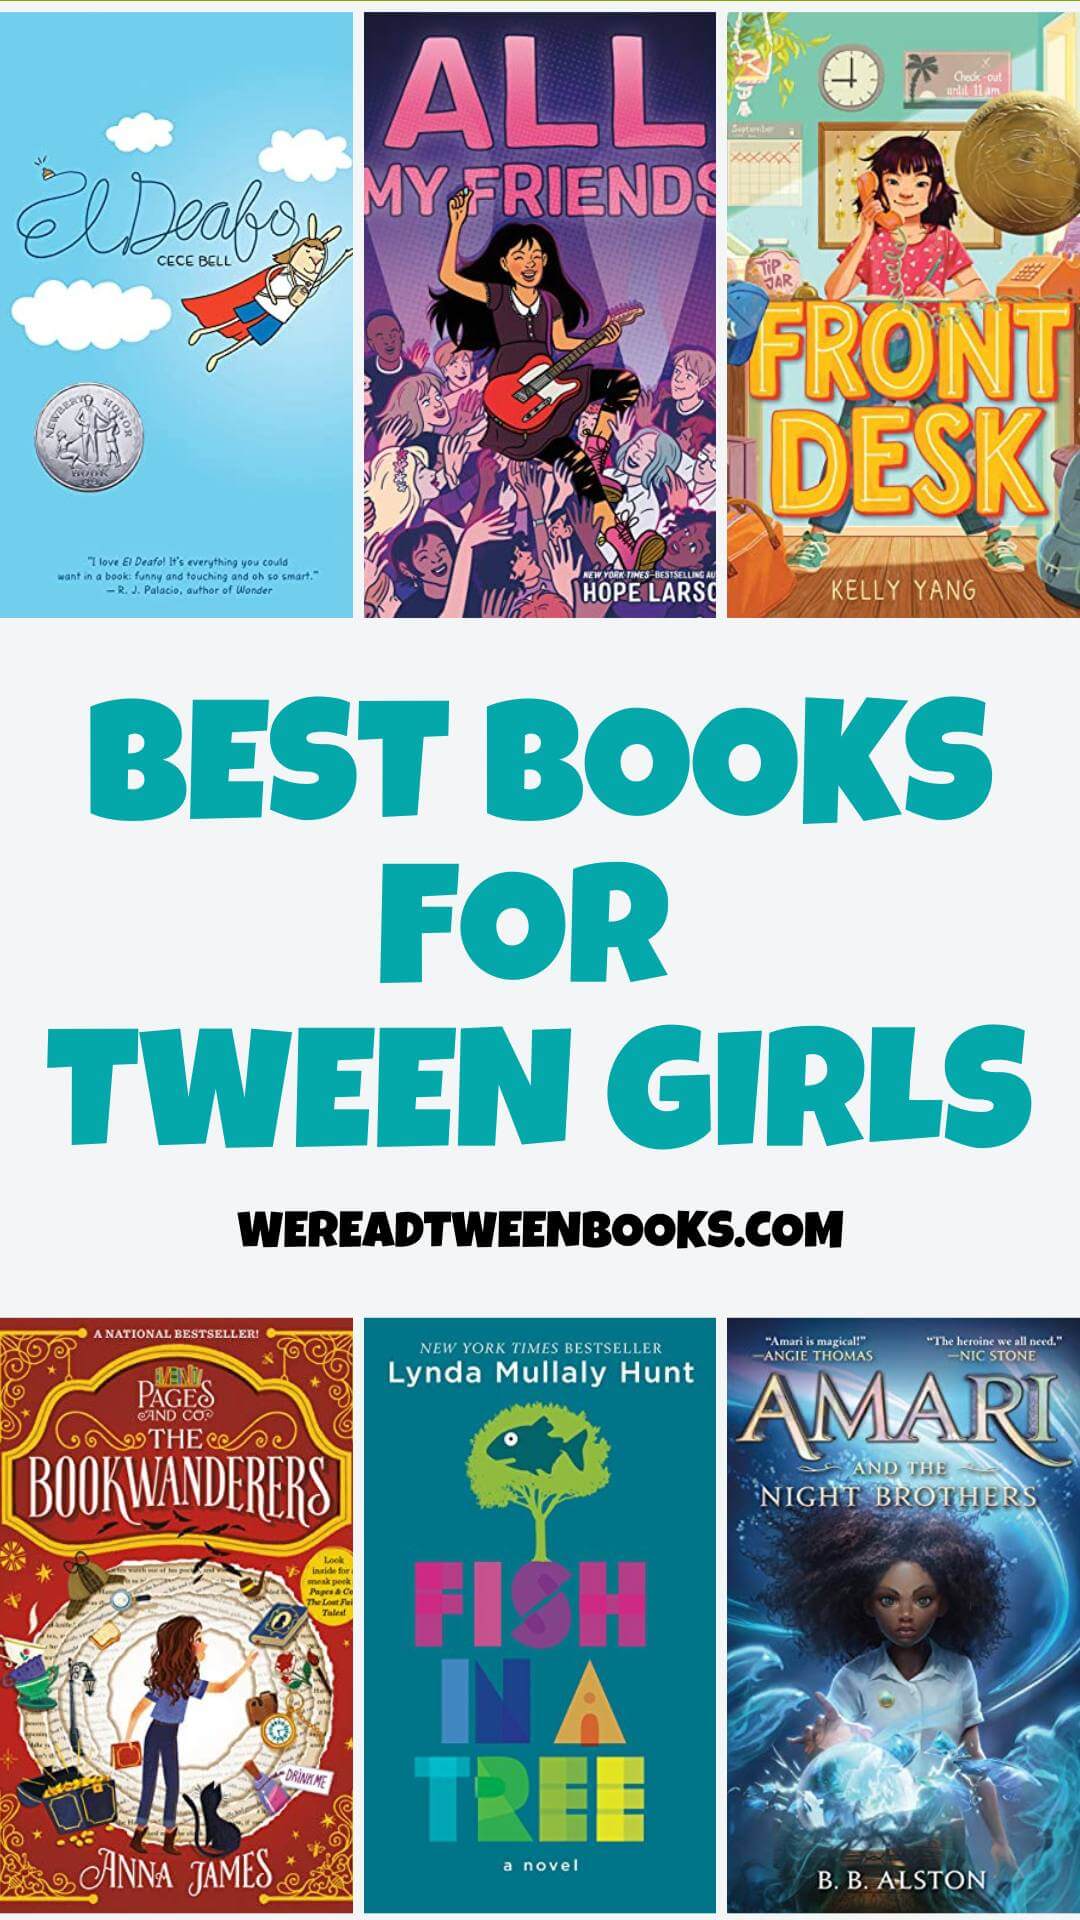 Check out the book list of best books for tween girls worth reading from book bloggers, We Read Tween Books.